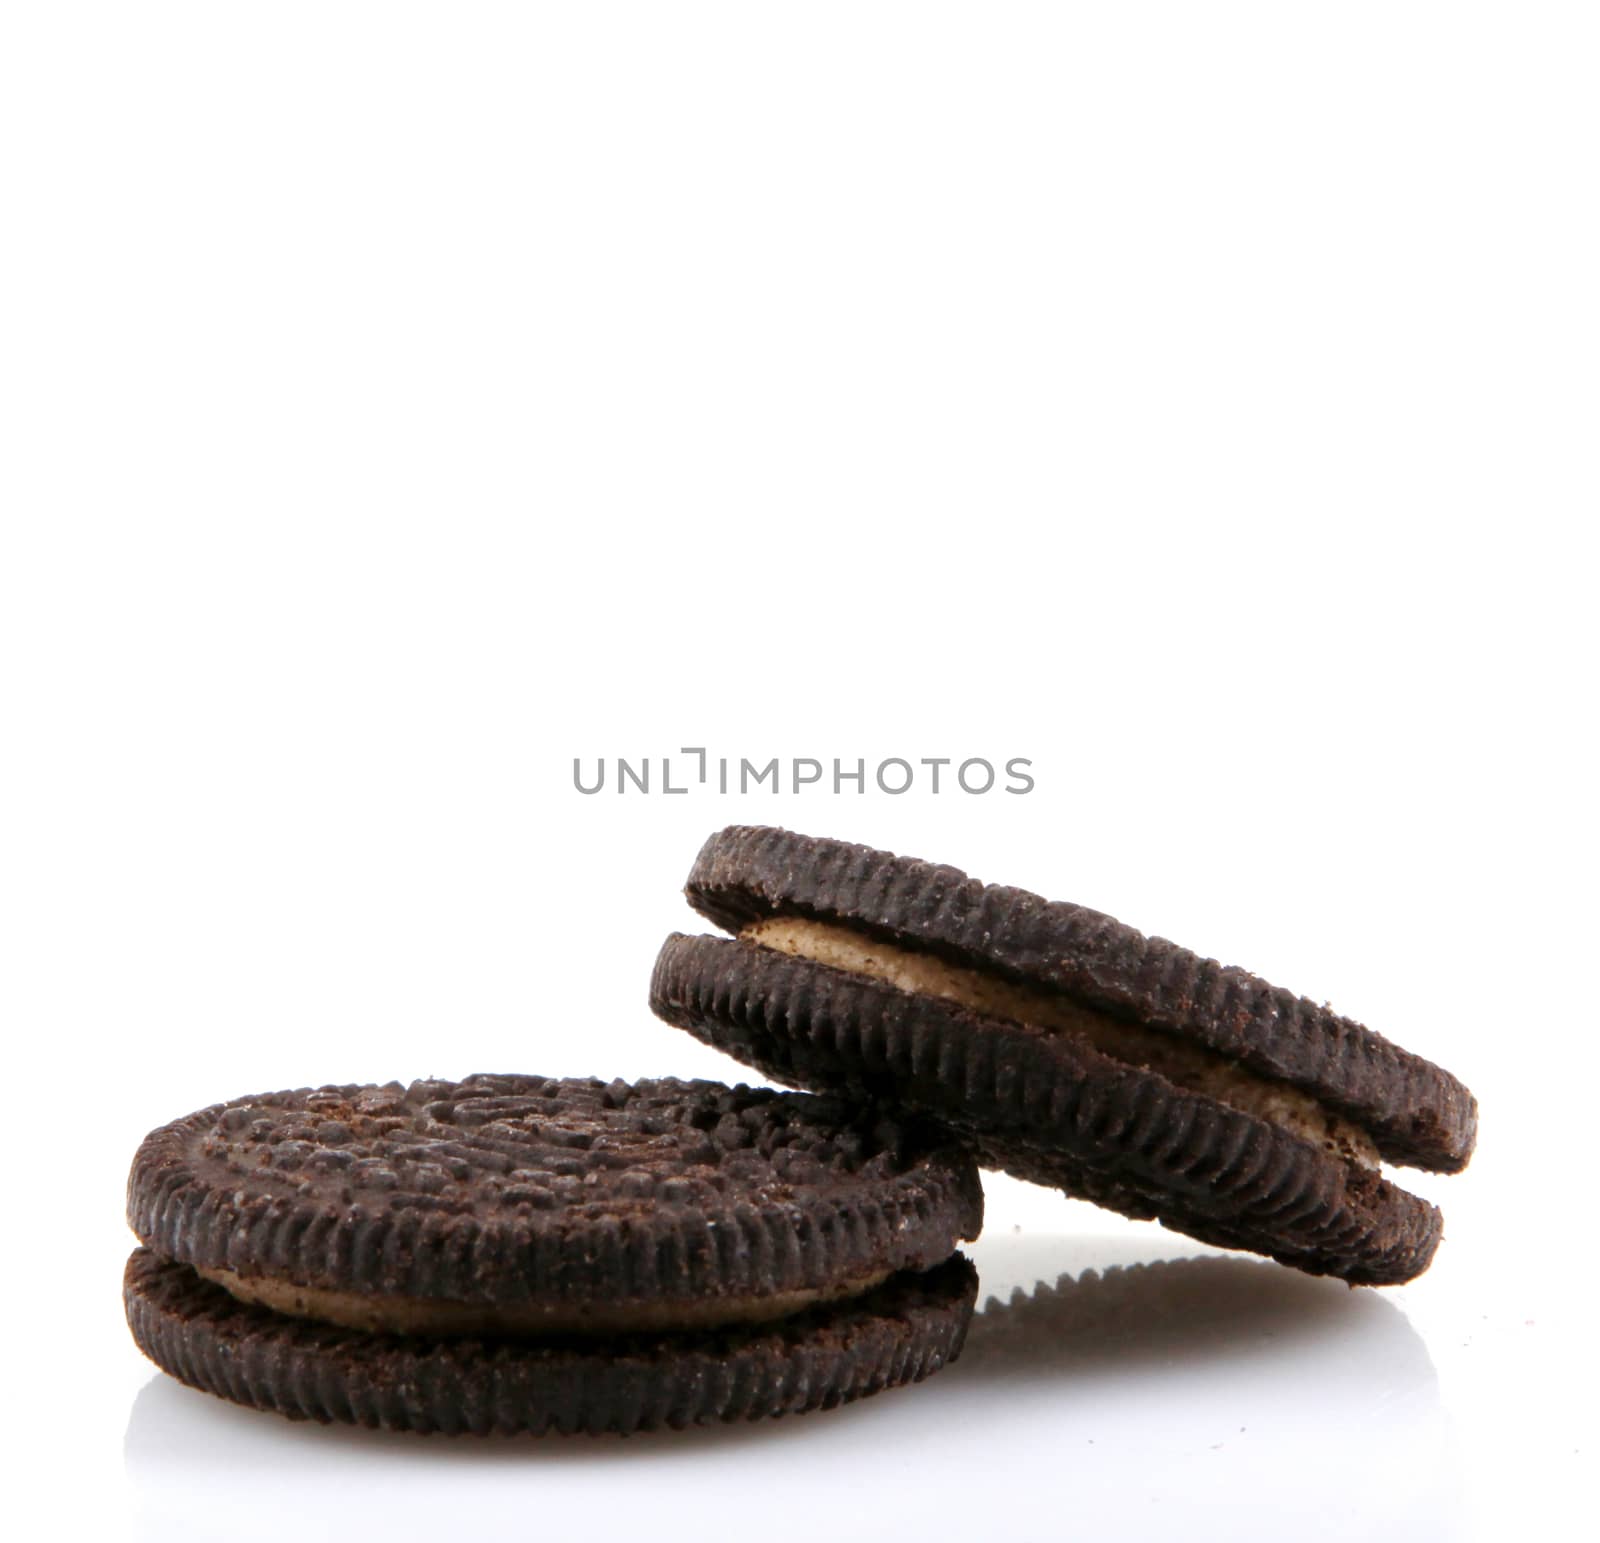 AYTOS, BULGARIA - APRIL 03, 2016: Oreo isolated on white background. Oreo is a sandwich cookie consisting of two chocolate disks with a sweet cream filling in between. by nenov